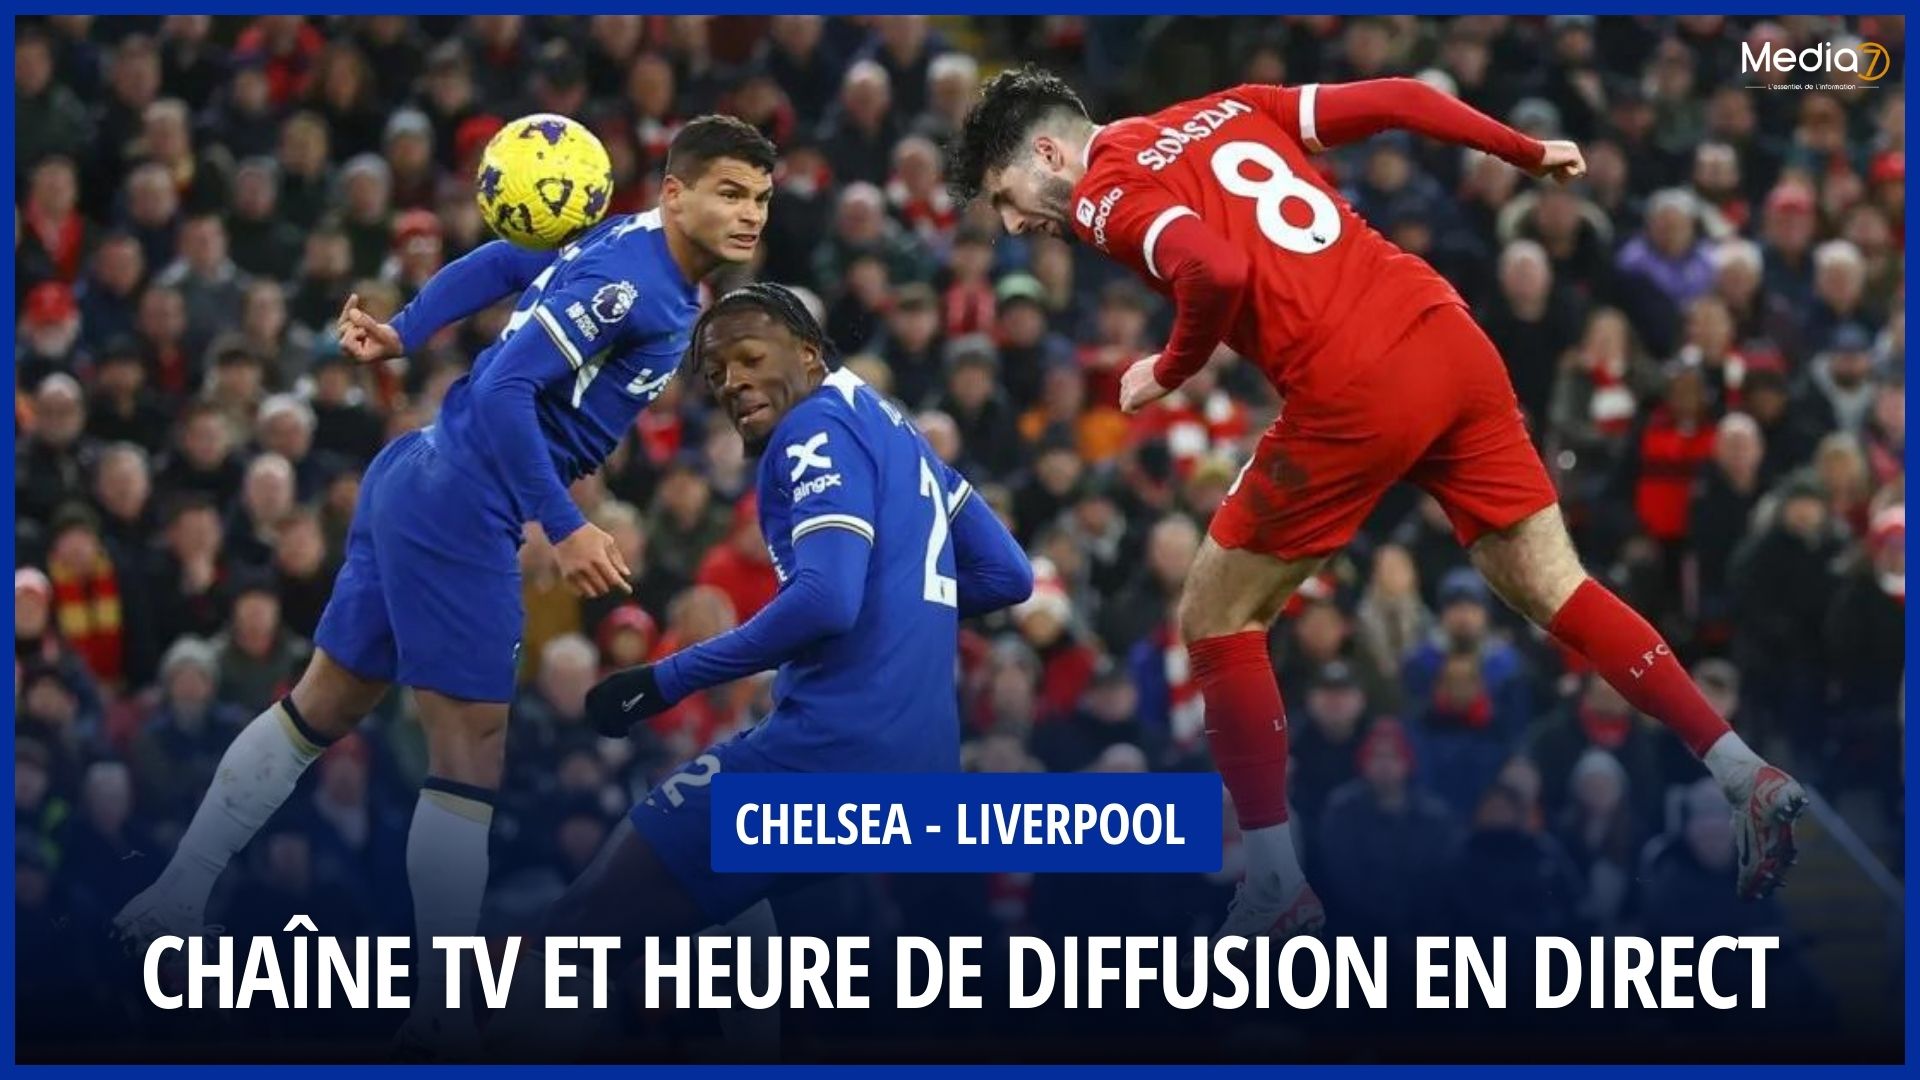 Chelsea - Liverpool Match Live: TV Channel and Broadcast Time - Media7